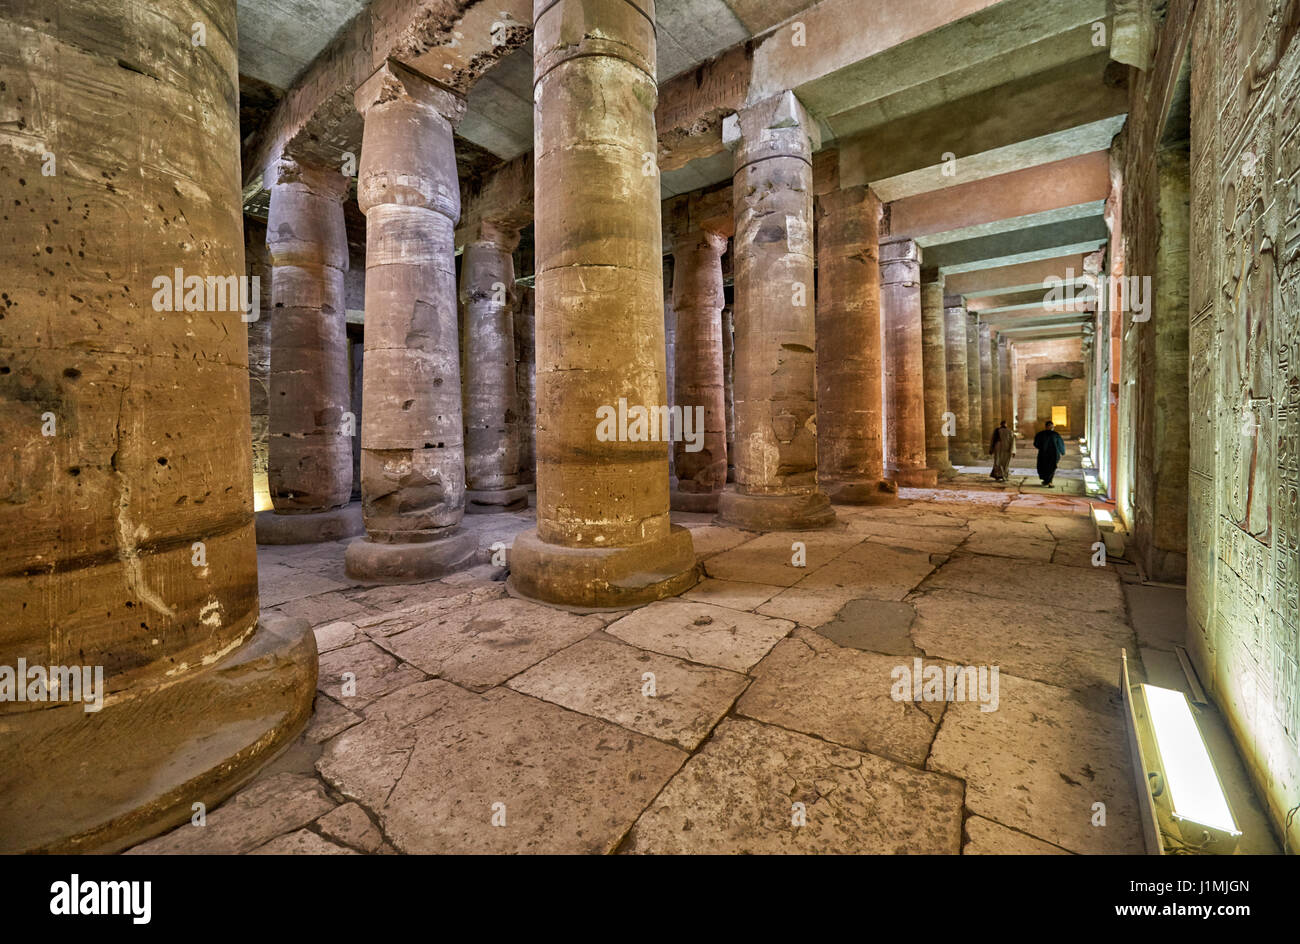 Second Hypostyle Hall with papyrus cluster columns inside Temple of Seti I , Abydos, Egypt, Africa Stock Photo